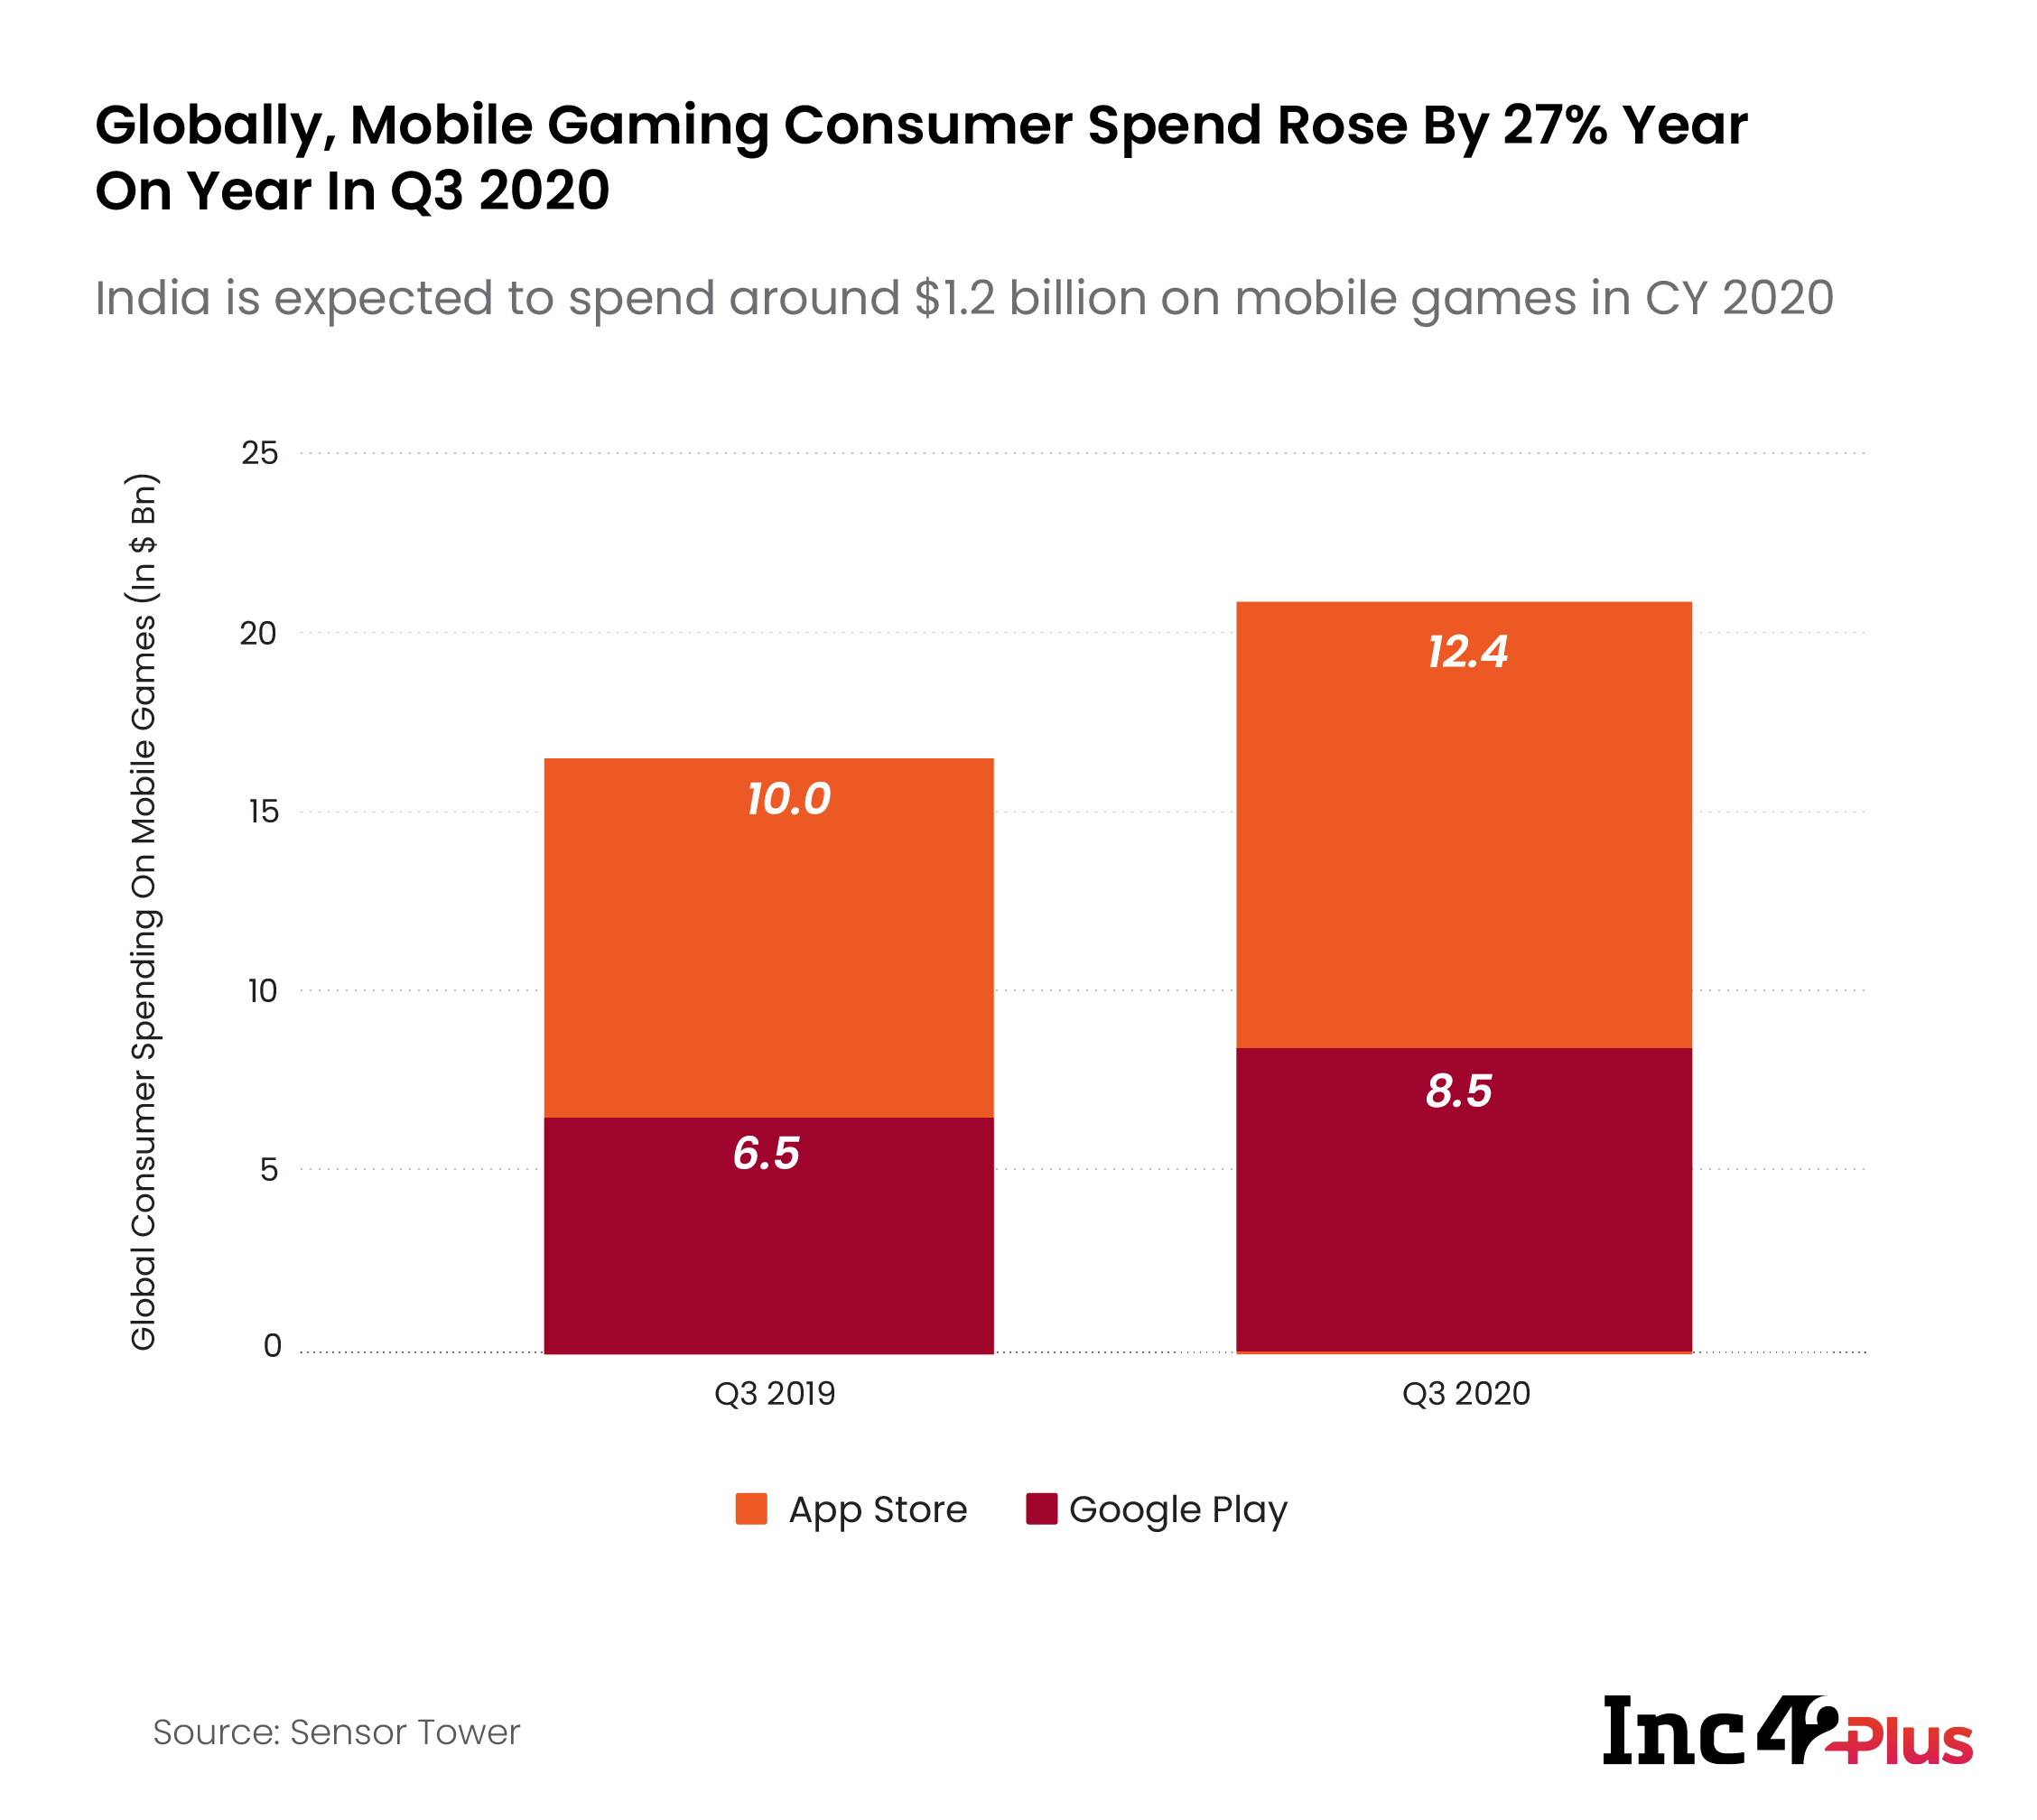 Globally, Mobile Gaming Consumer Spend Rose By 27% Year On Year In Q3 2020